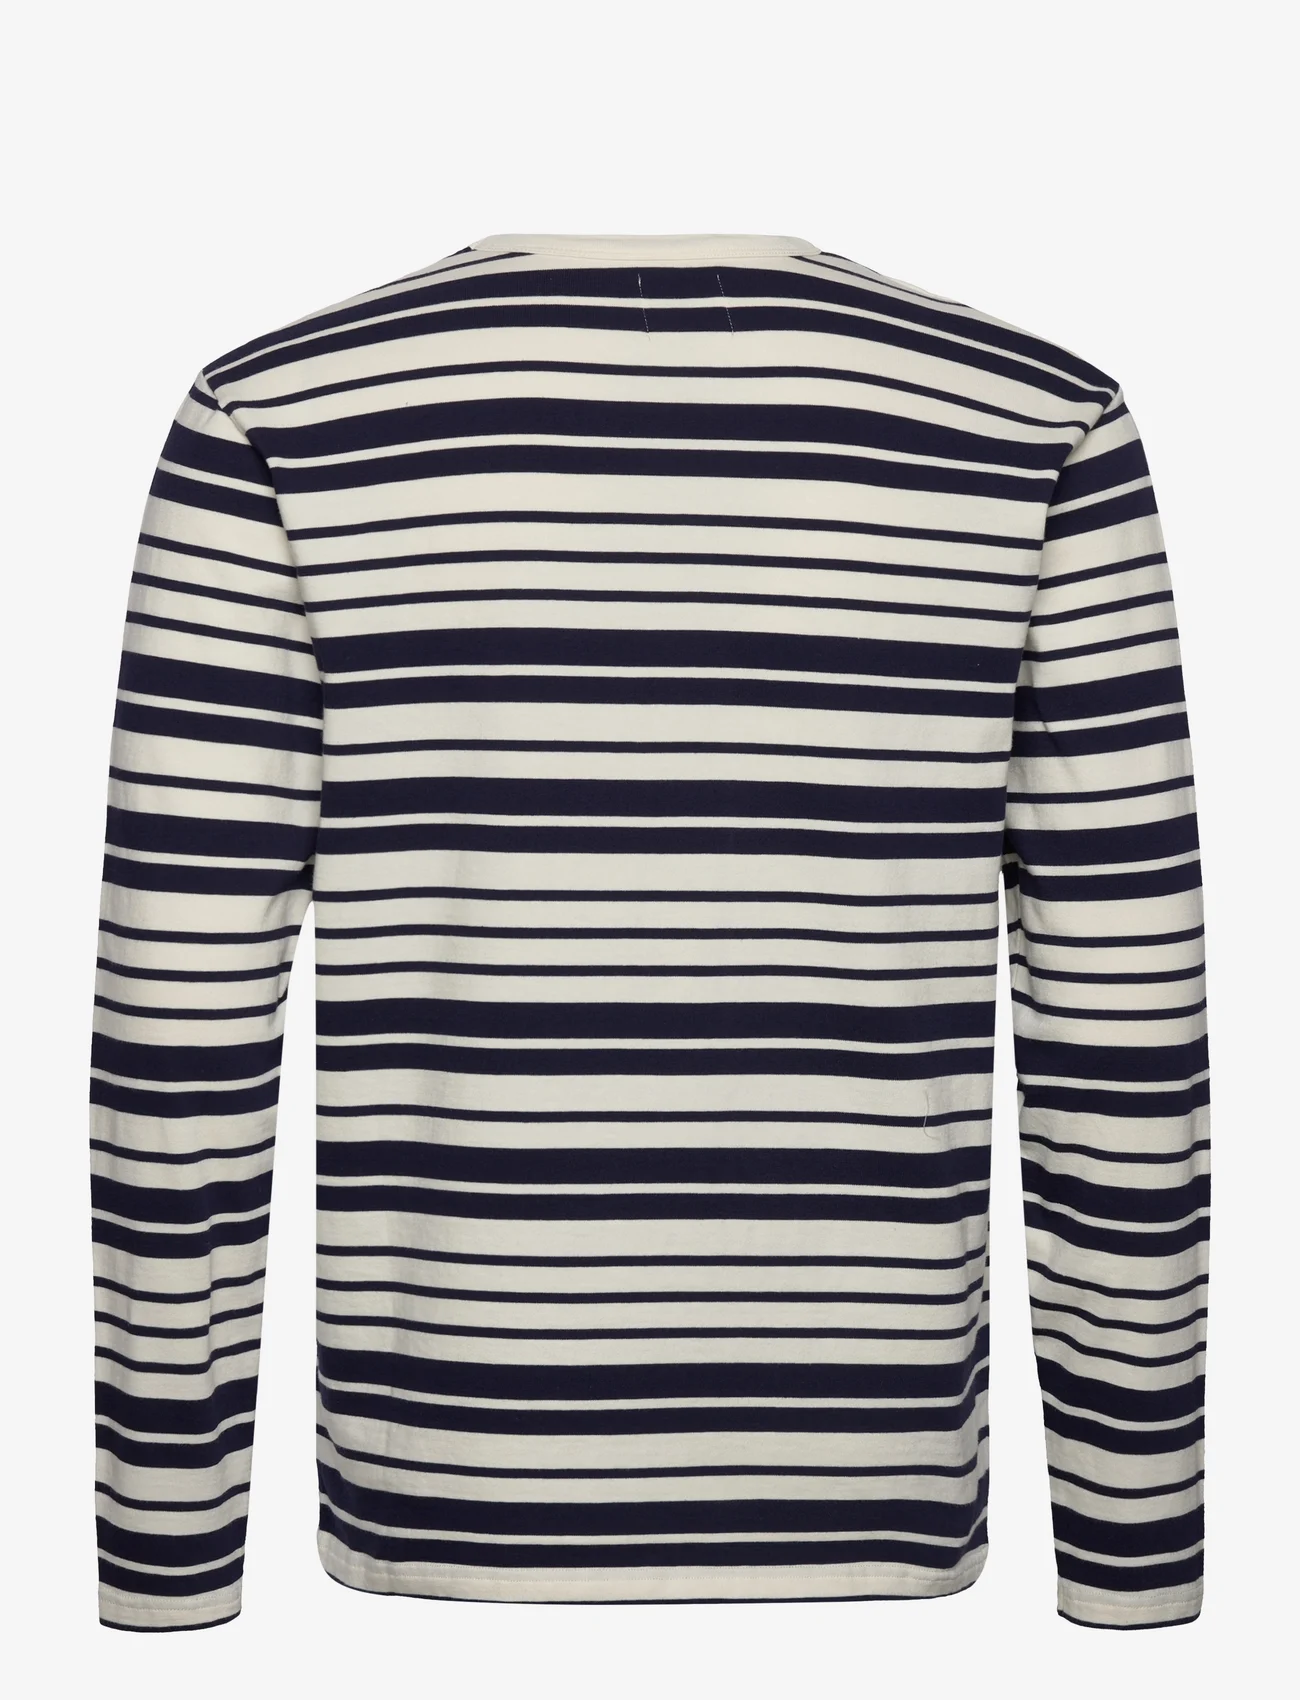 Double A by Wood Wood - Mel stripe long sleeve - langærmede t-shirts - off-white/navy stripes - 1